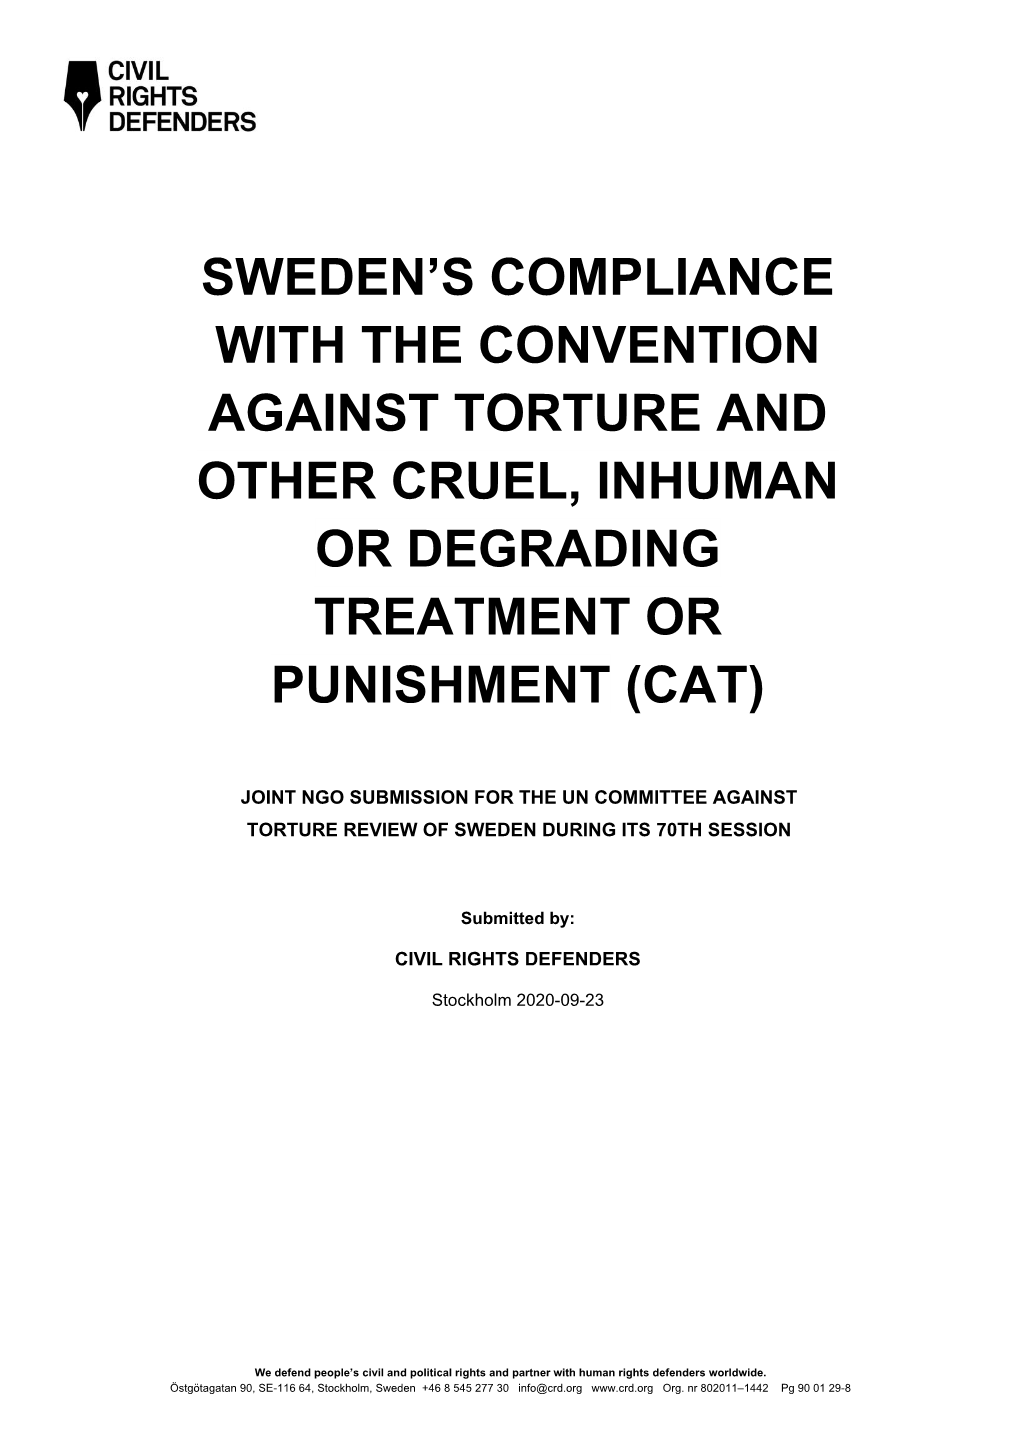 Sweden's Compliance with the Convention Against Torture and Other